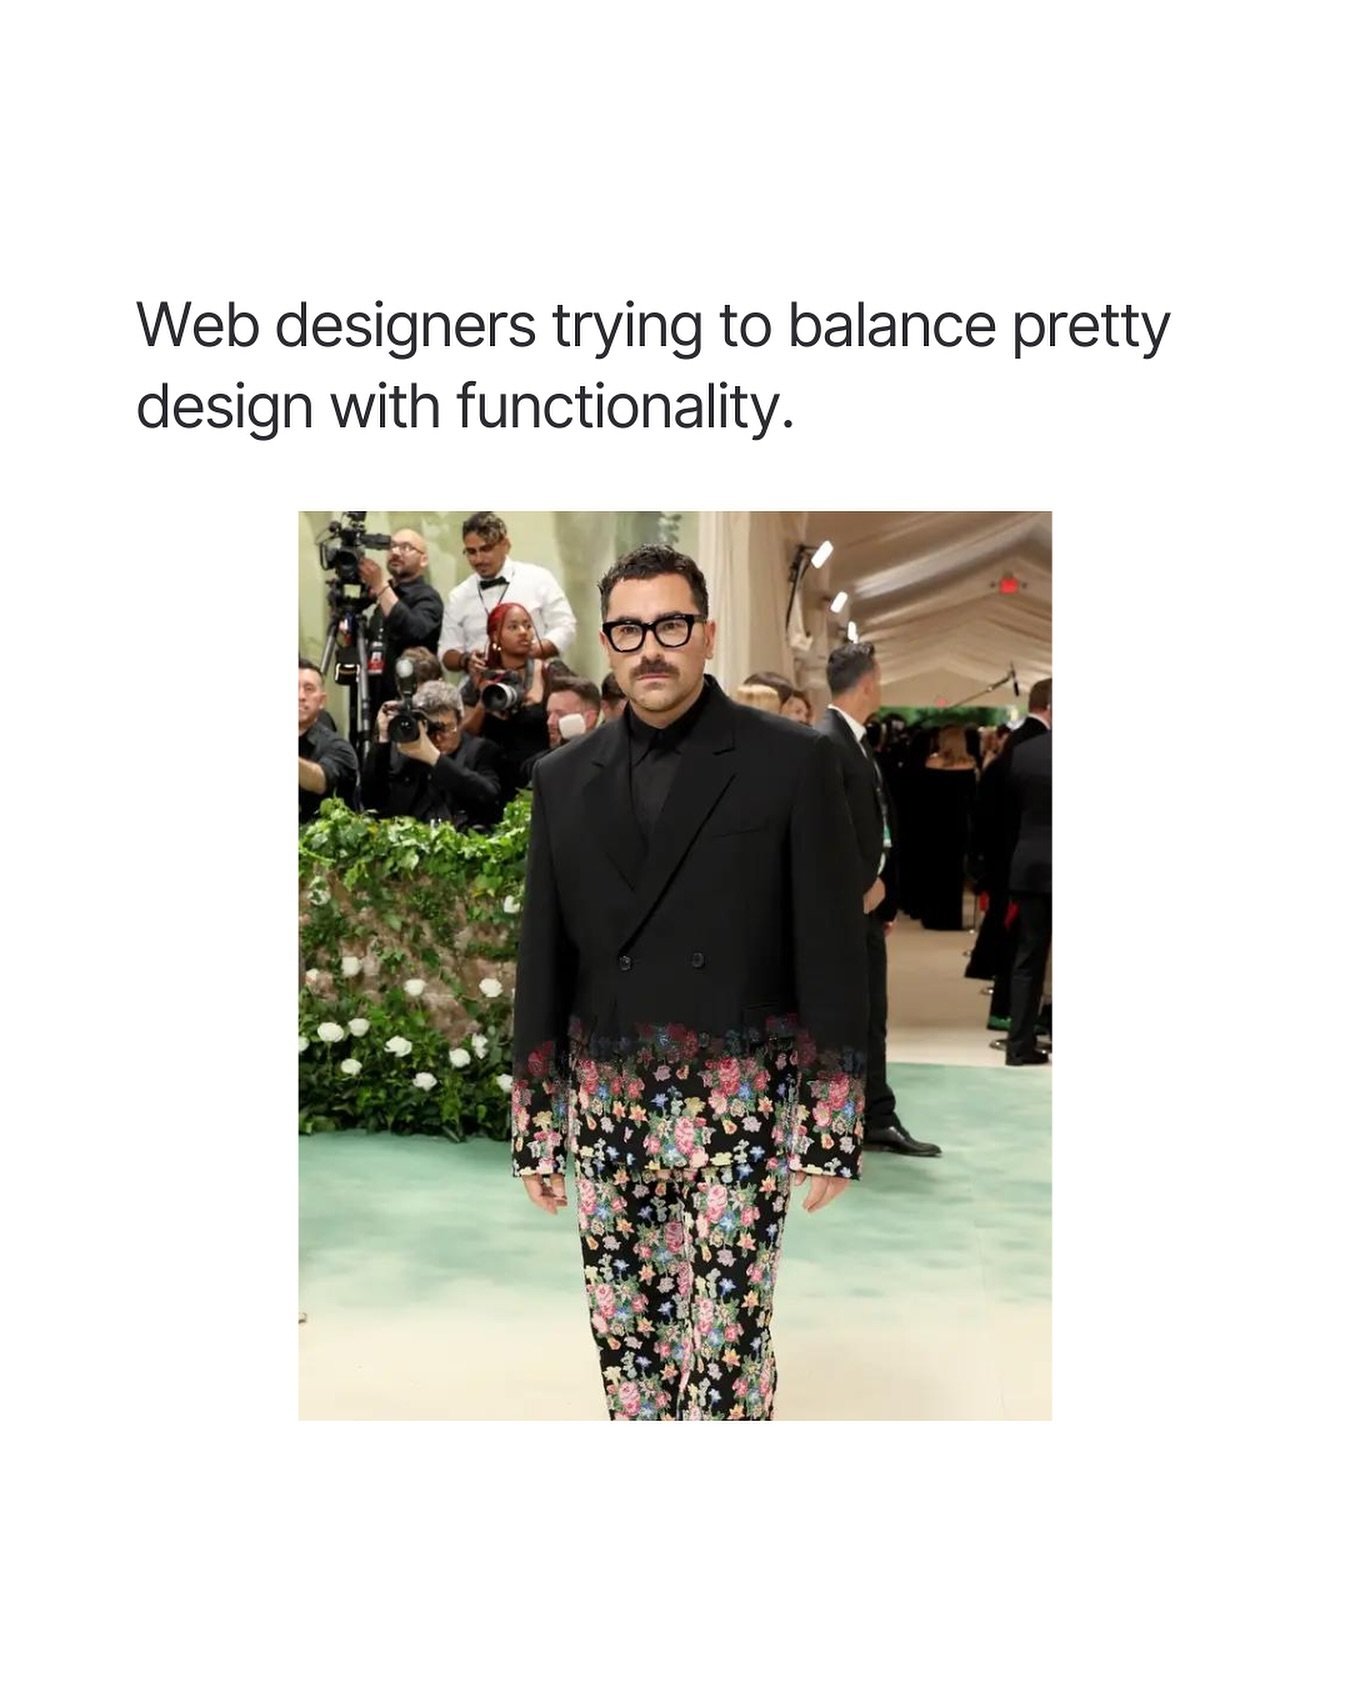 Great web design is so much more than pretty layouts &amp; fancy features! 💫⁠
⁠
We also need to prioritise:⁠
🤍 SEO⁠
🤍 Accessibility⁠
🤍 User journeys⁠
🤍 Strategy &amp; goals⁠
⁠
It&rsquo;s definitely an art/skill balancing all this backstage funct